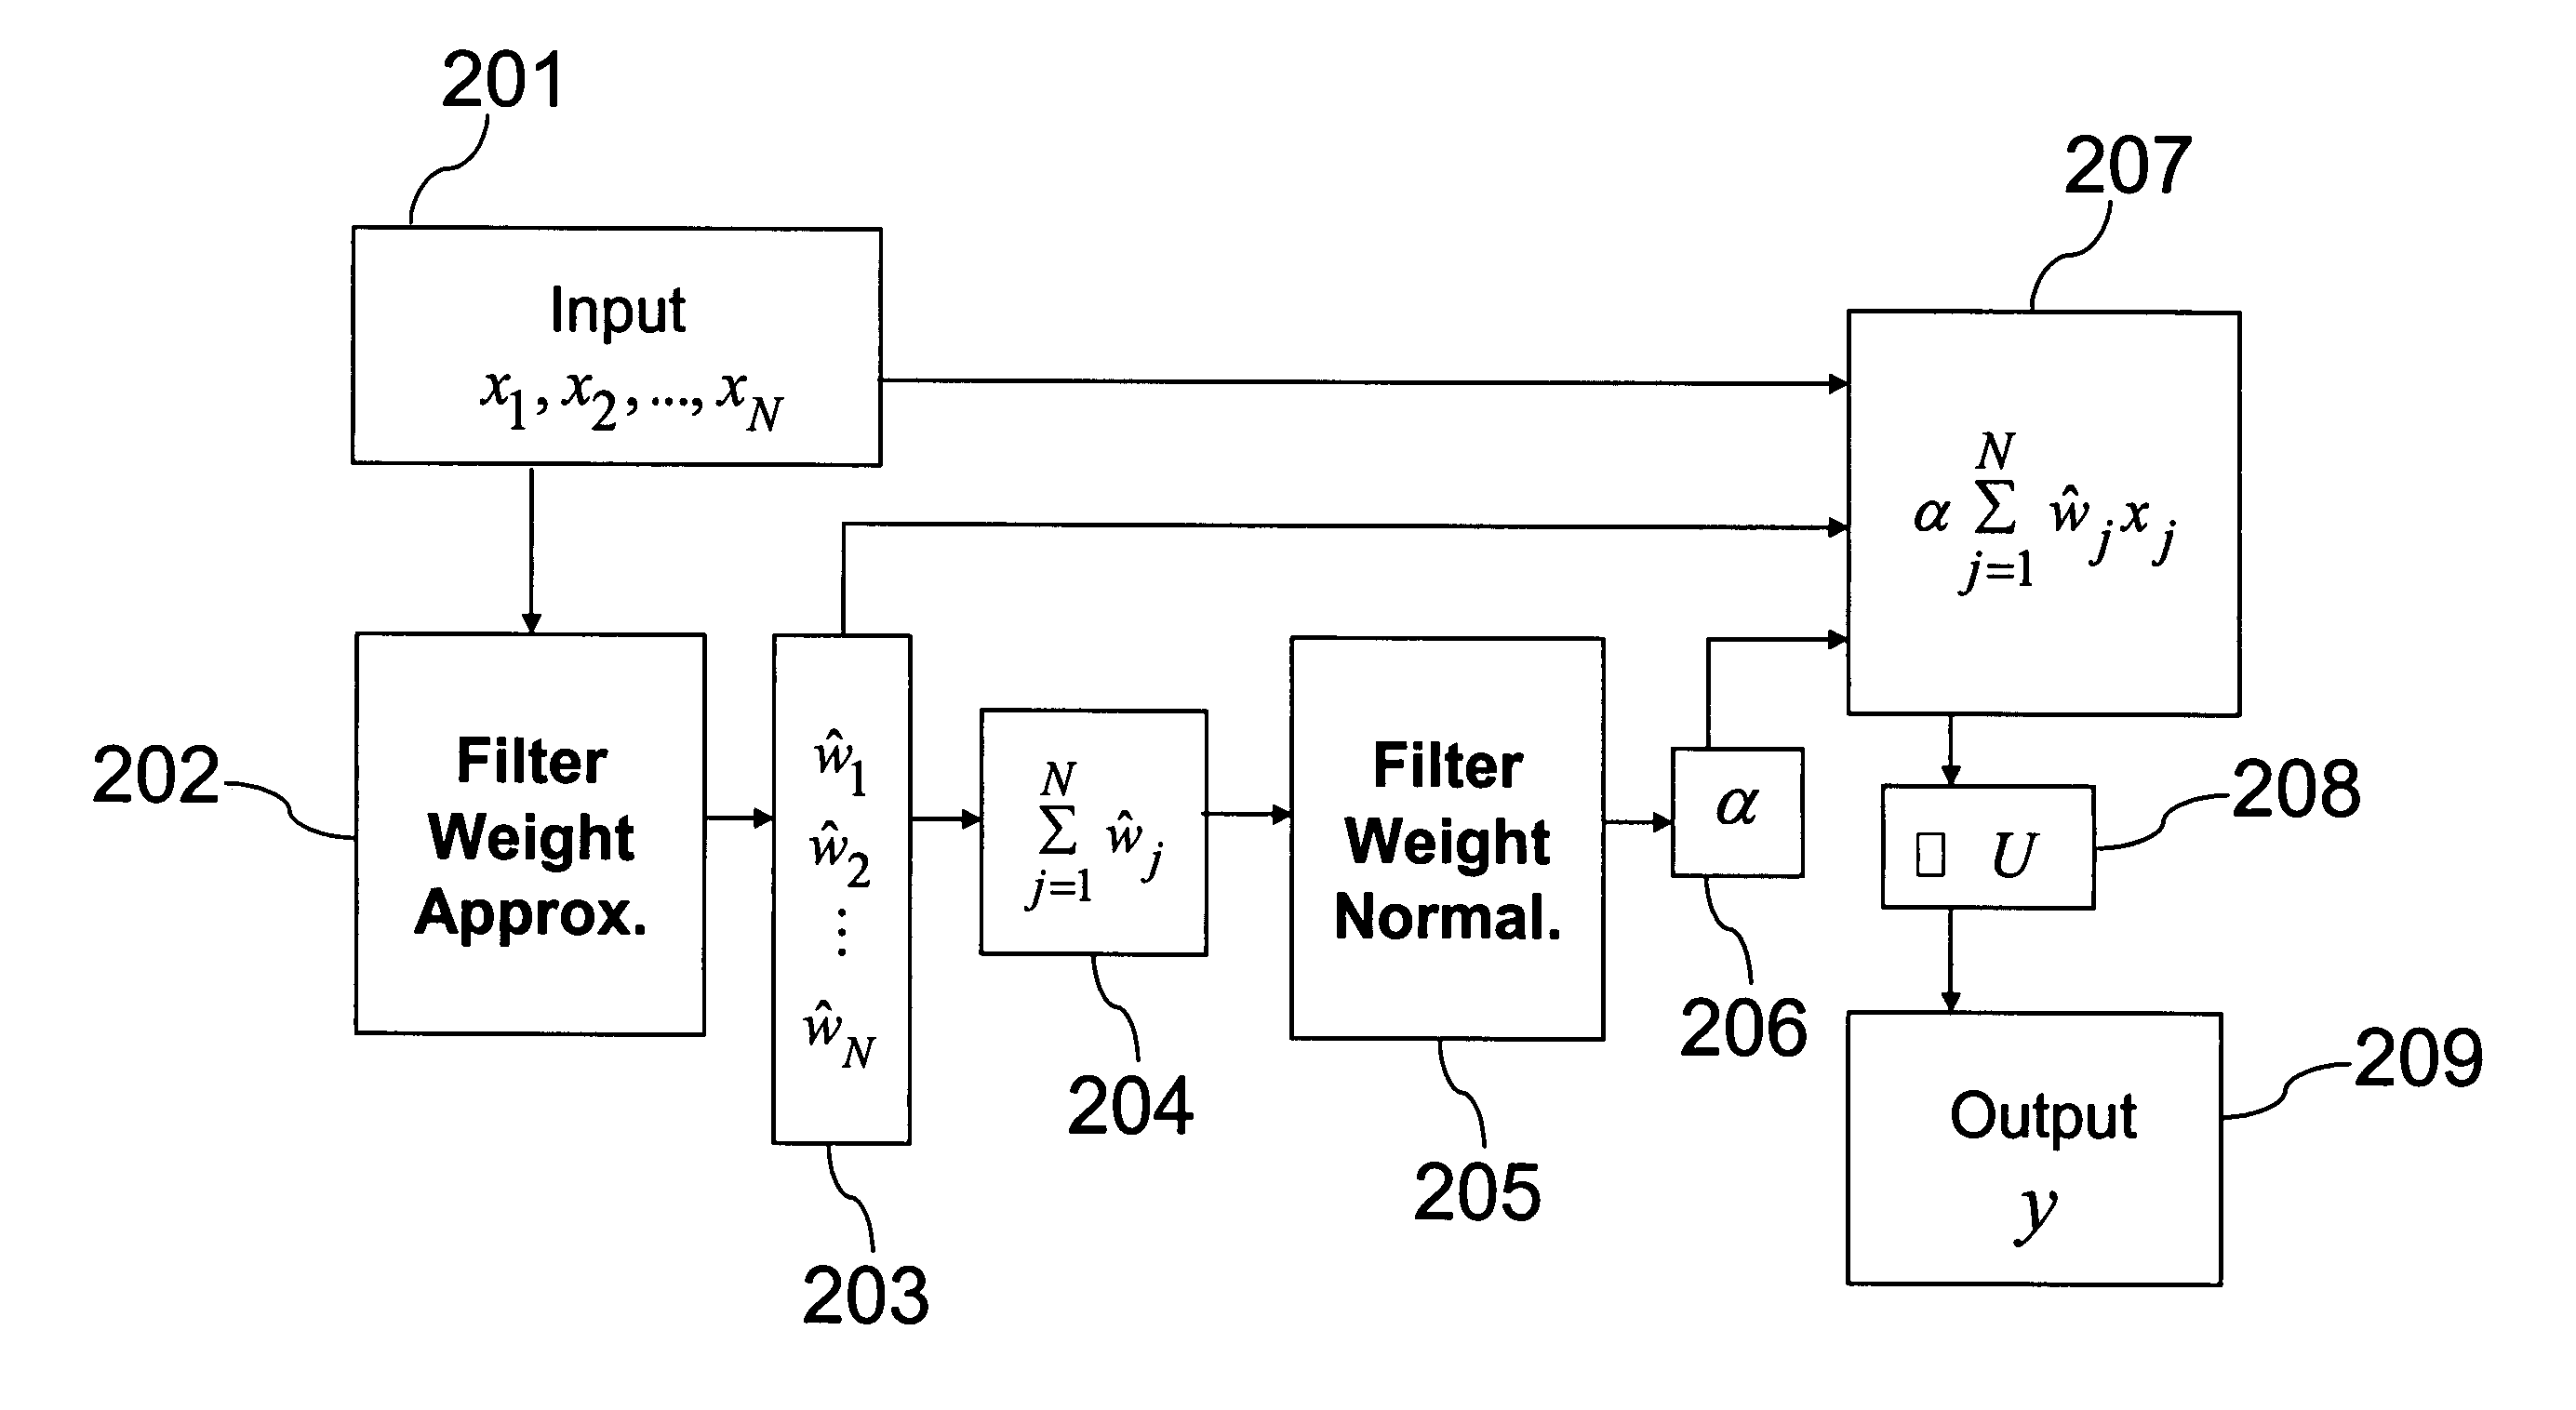 System and method for fuzzy filtering images